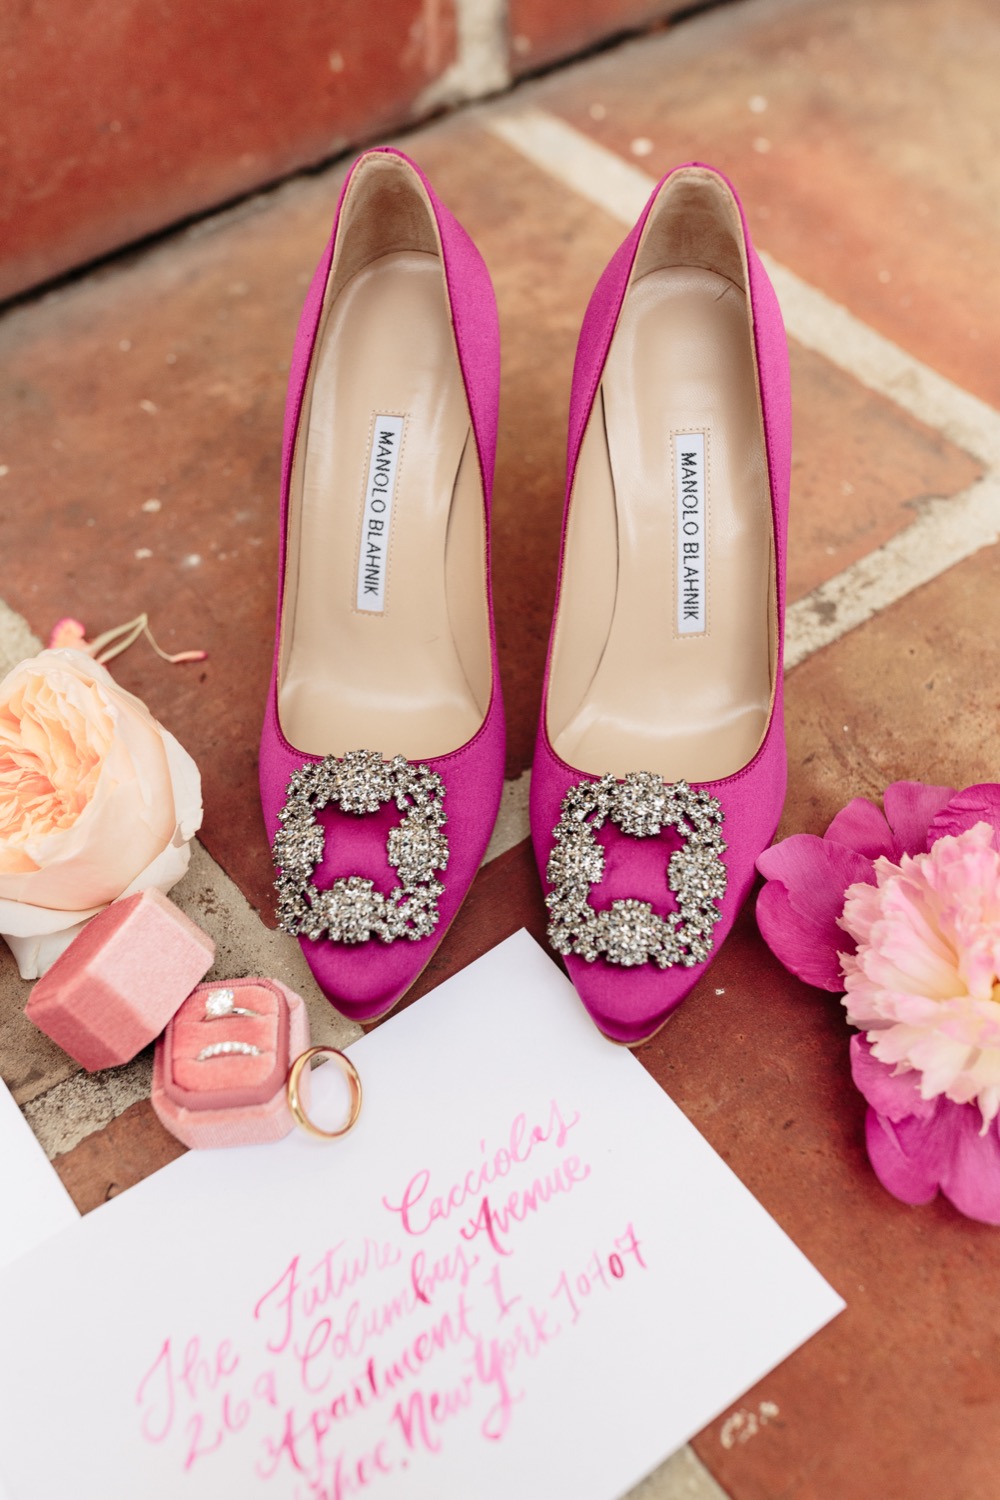 Carrie Bradshaw shoes